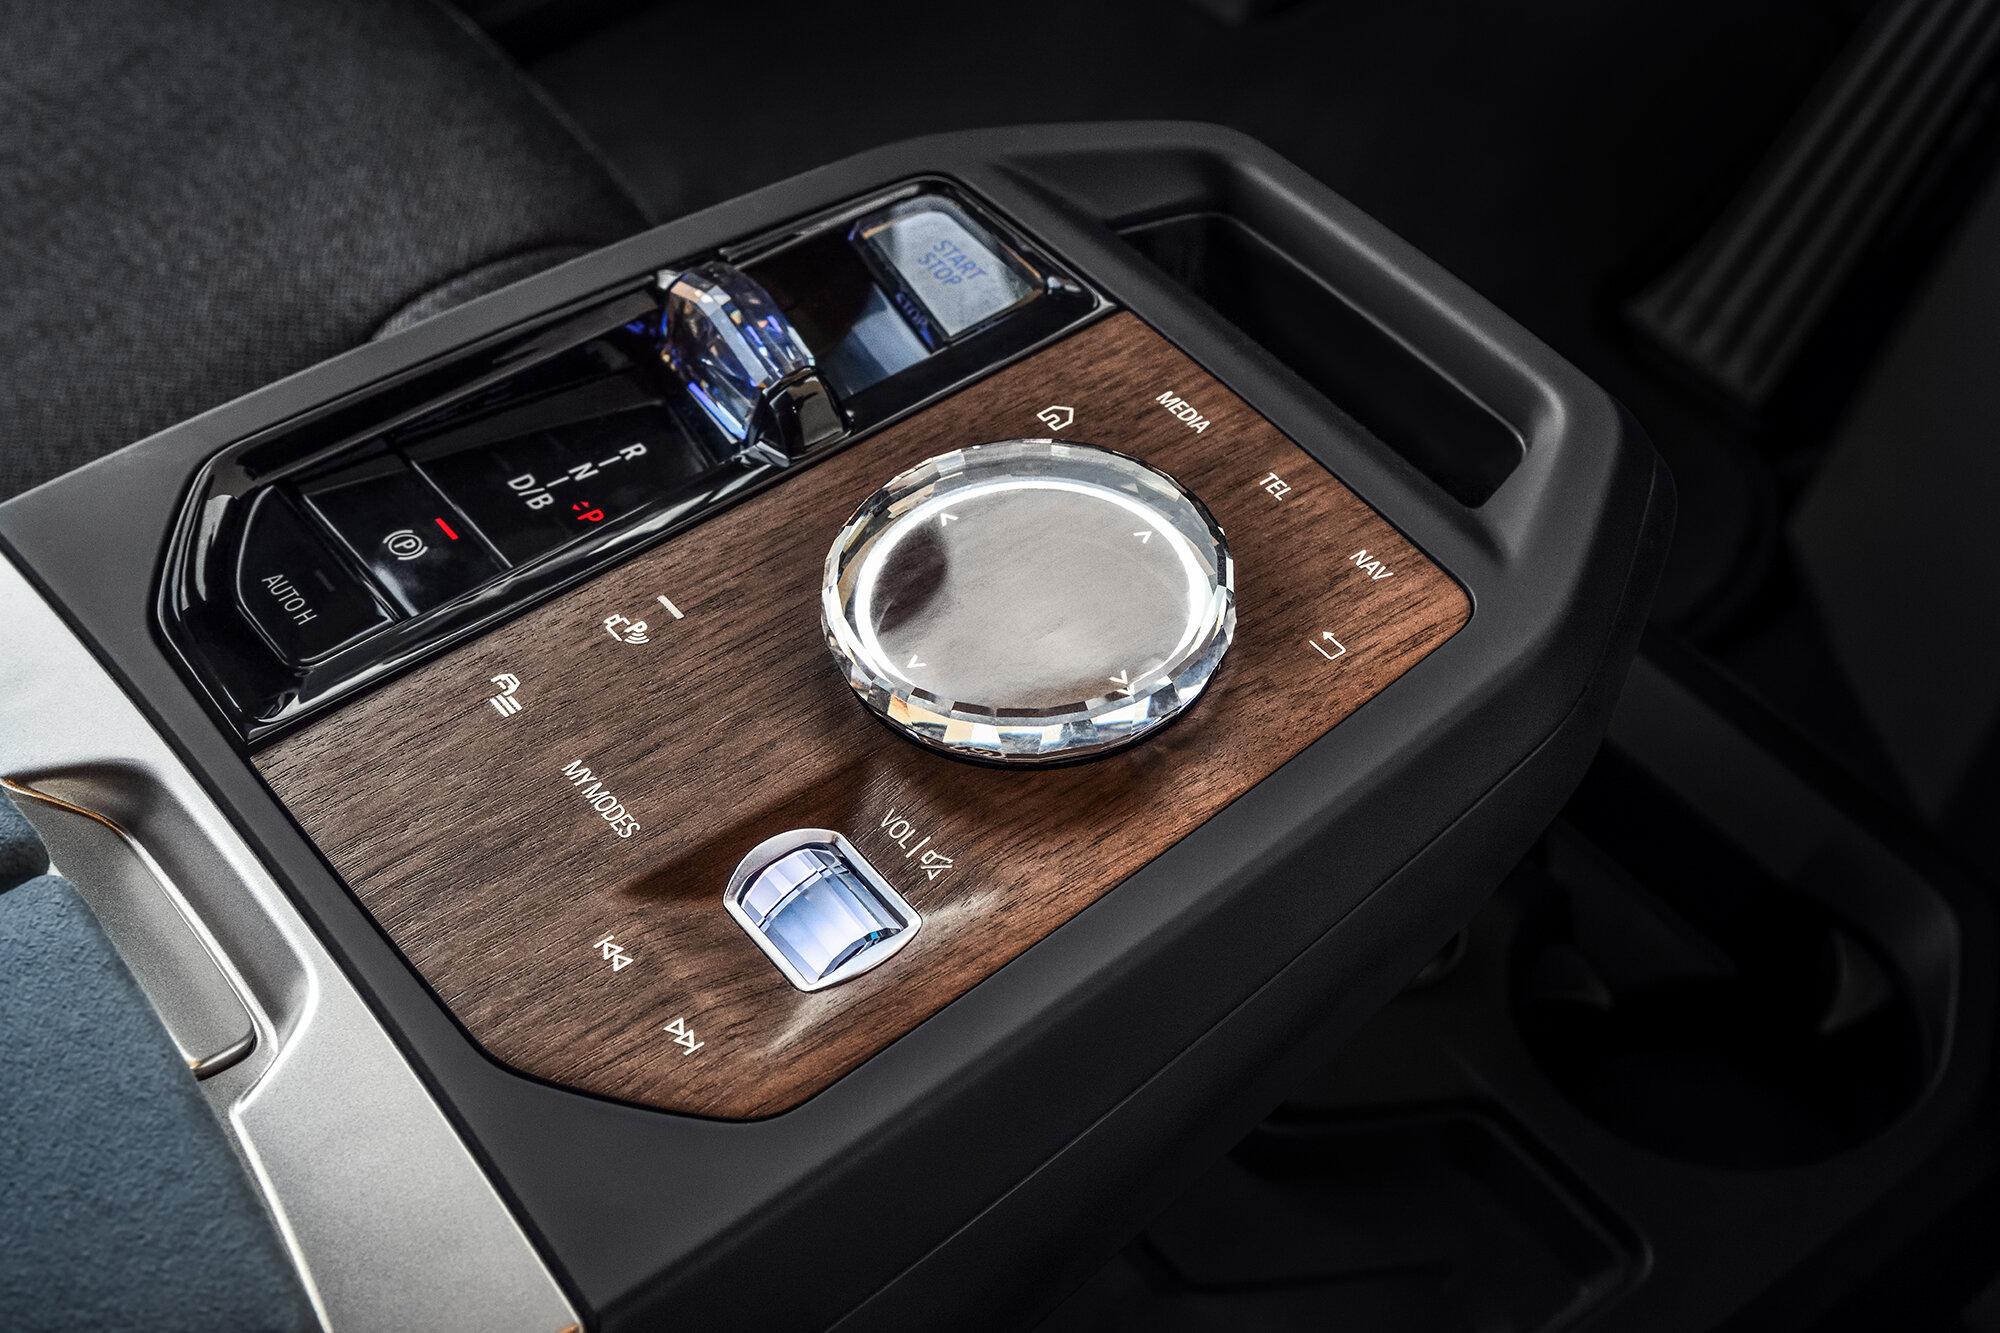 The new design of the centre console of the BMW iX